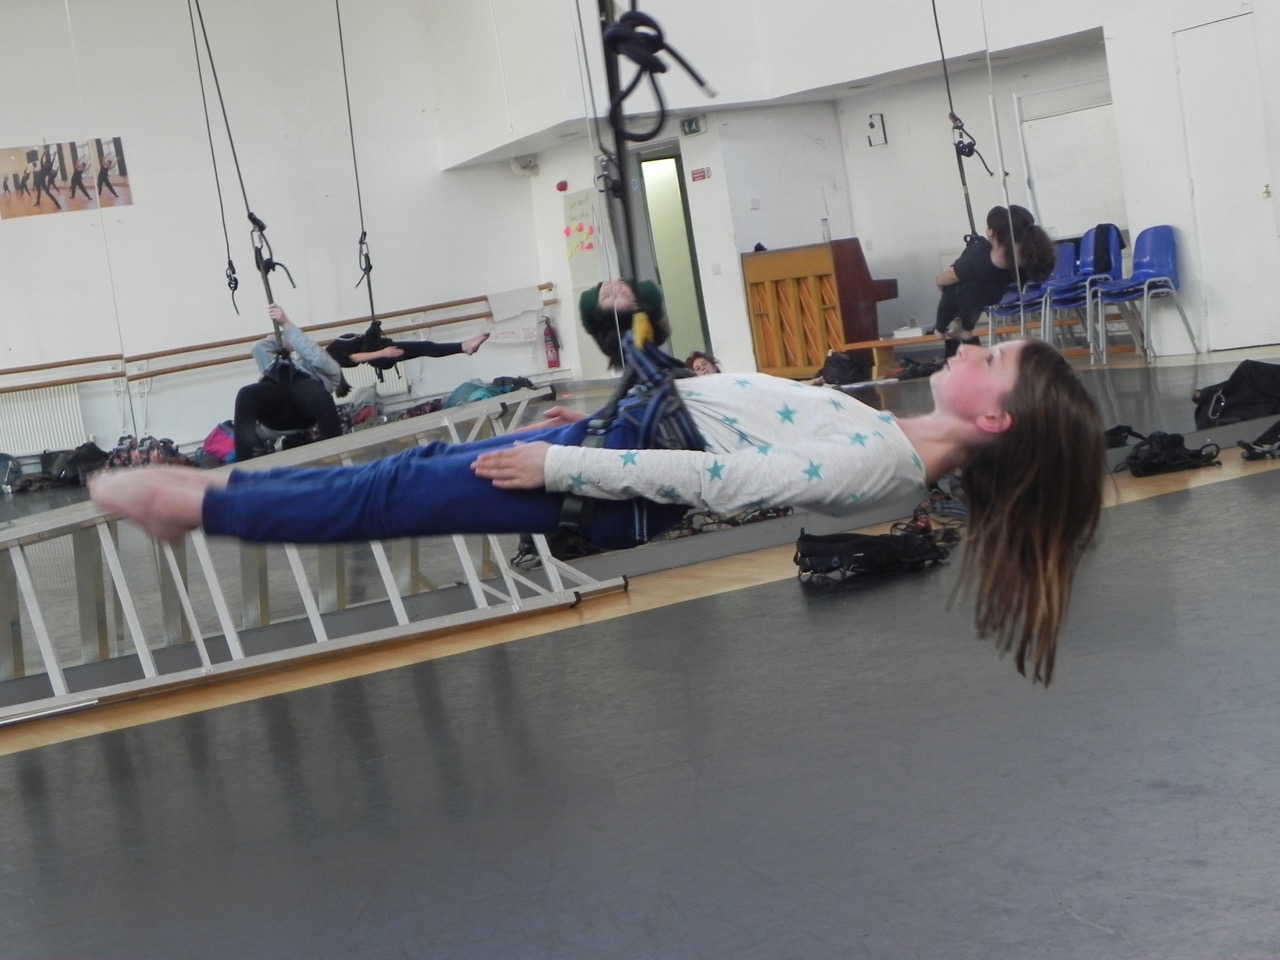 Young girl with straight plank body suspended in the air by a harness, other students reflected in the mirror behind.